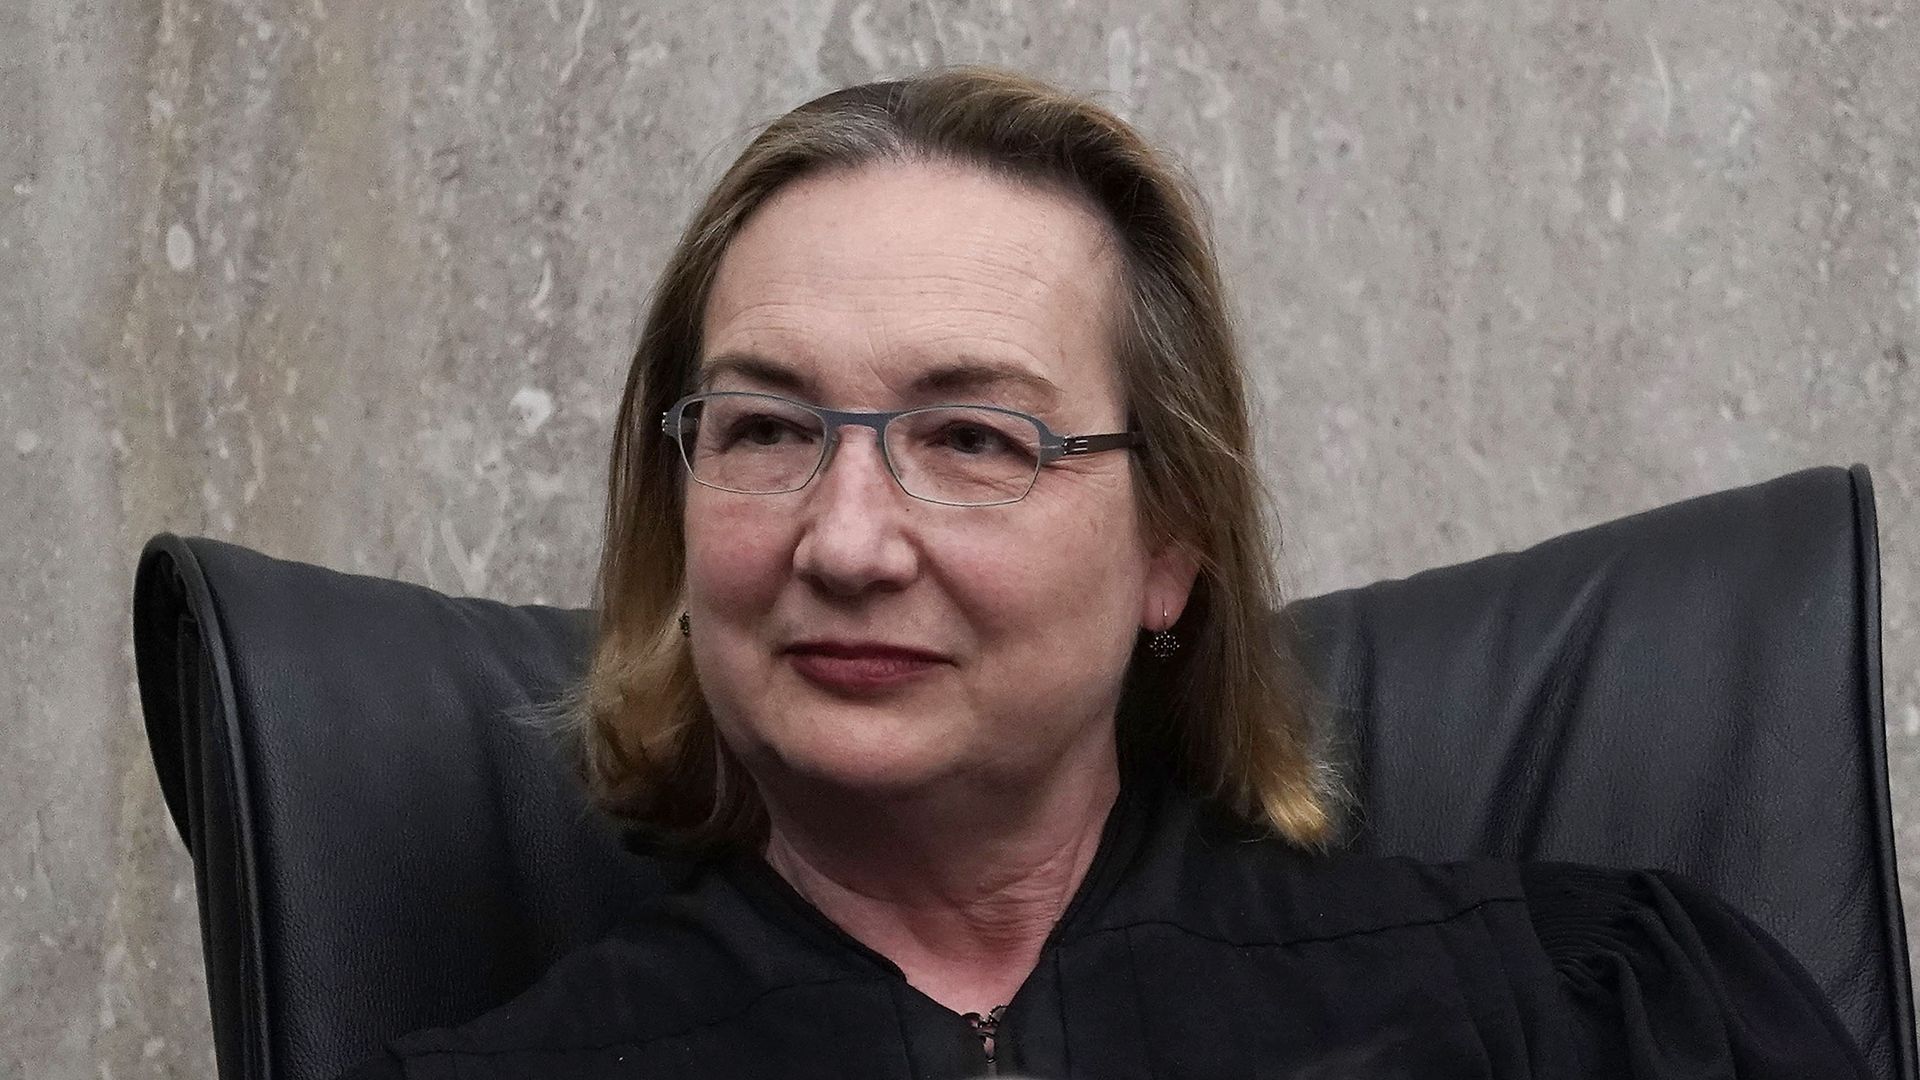 Judge Howell at the U.S. District Court in Washington, DC, in 2018